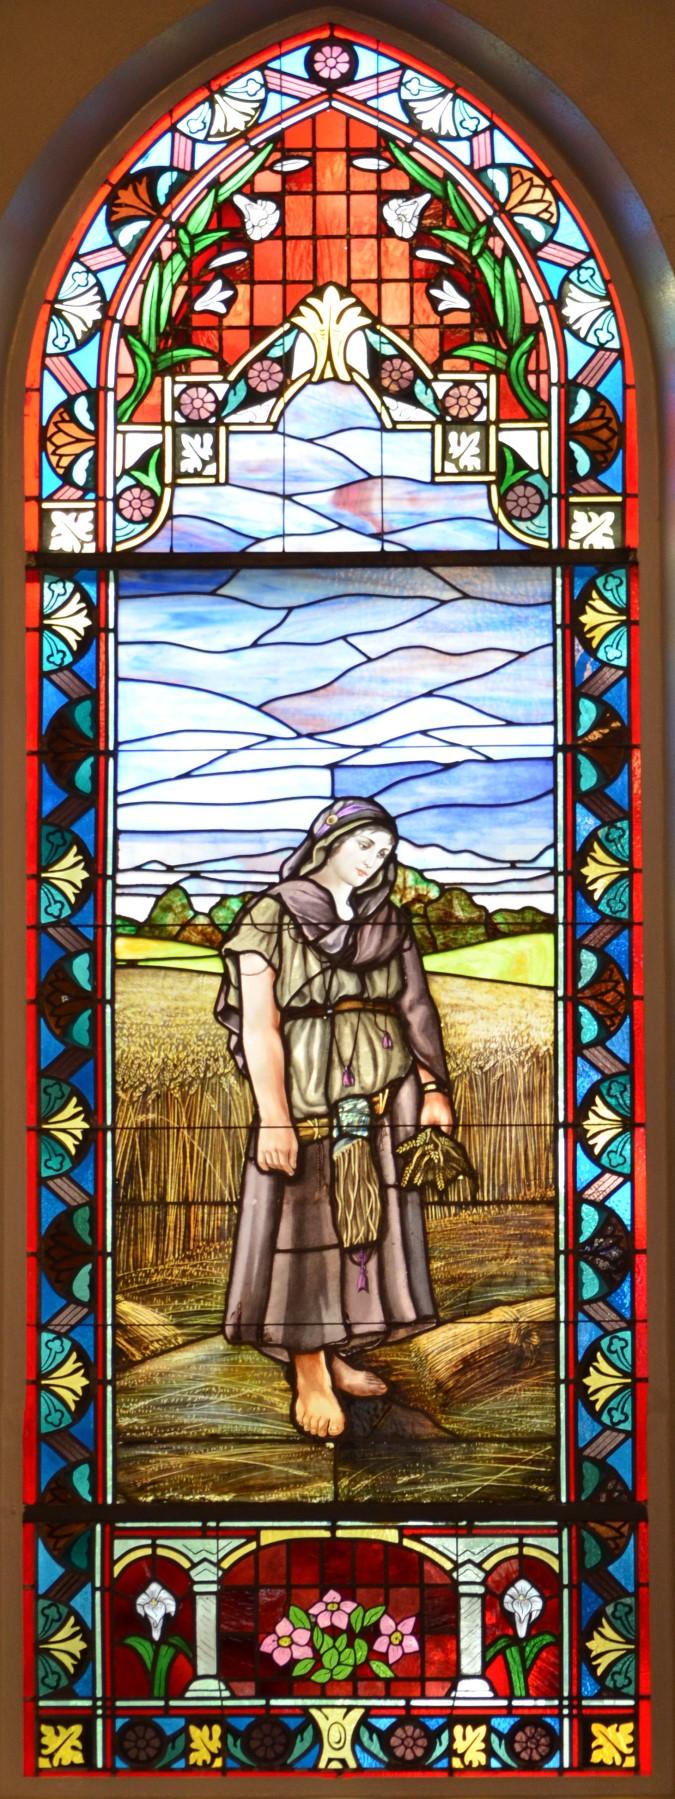 Ruth in the Wheat Fields, Ruth 1:1-4; 4:22.